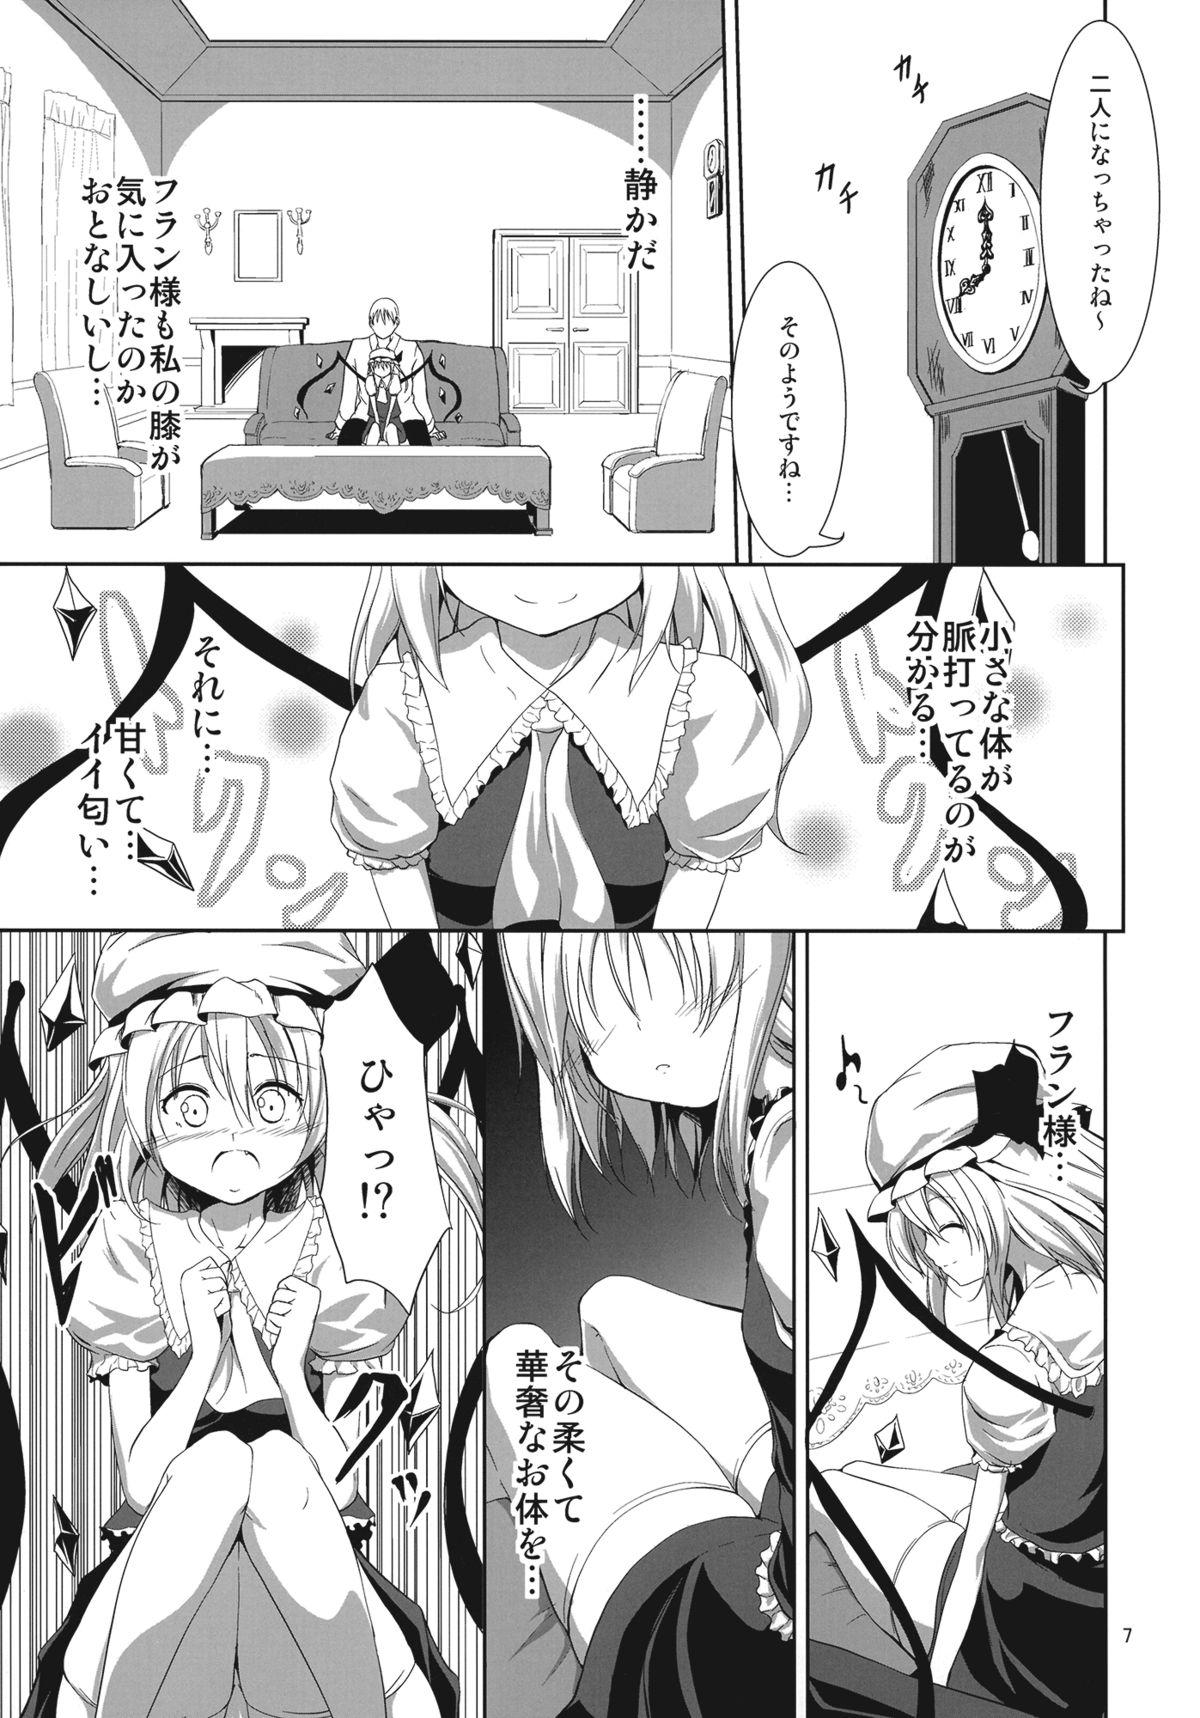 Suck kiss mark - Touhou project Facesitting - Page 7